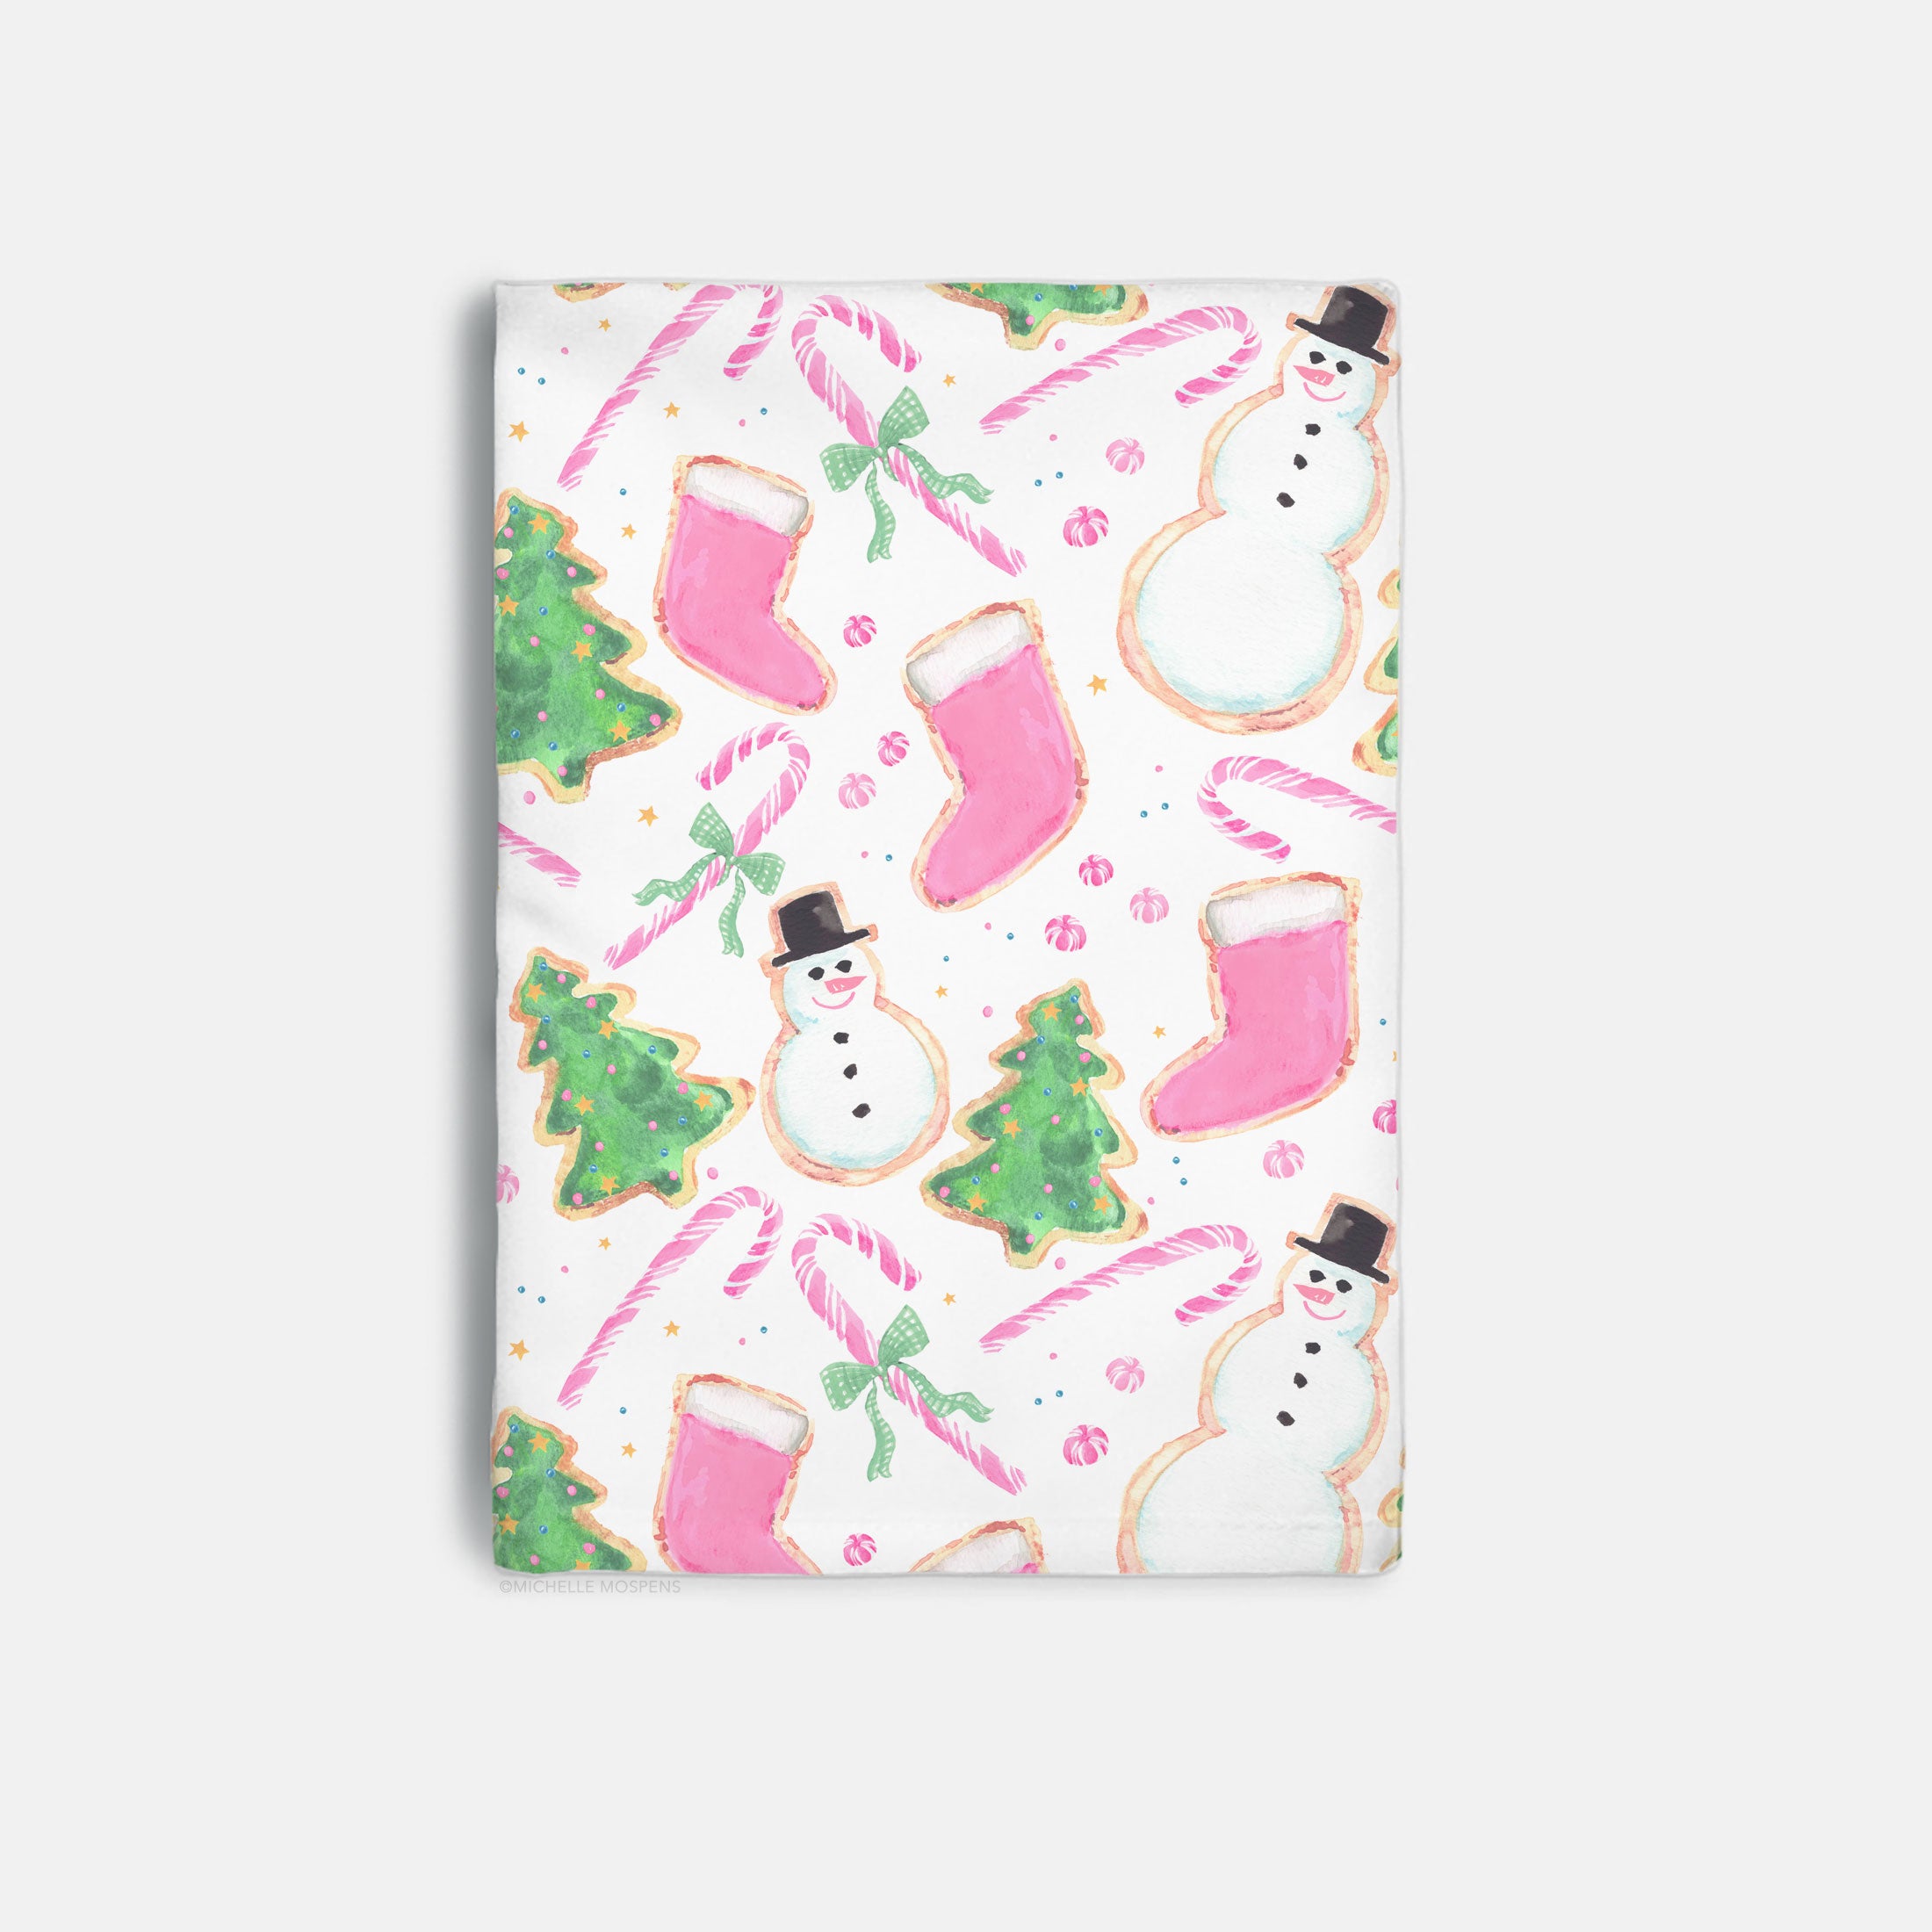 Watercolor Pink Christmas Cookies Decorative Hostess Towel by Michelle Mospens | Vibrant 20" Square Polyester Towel